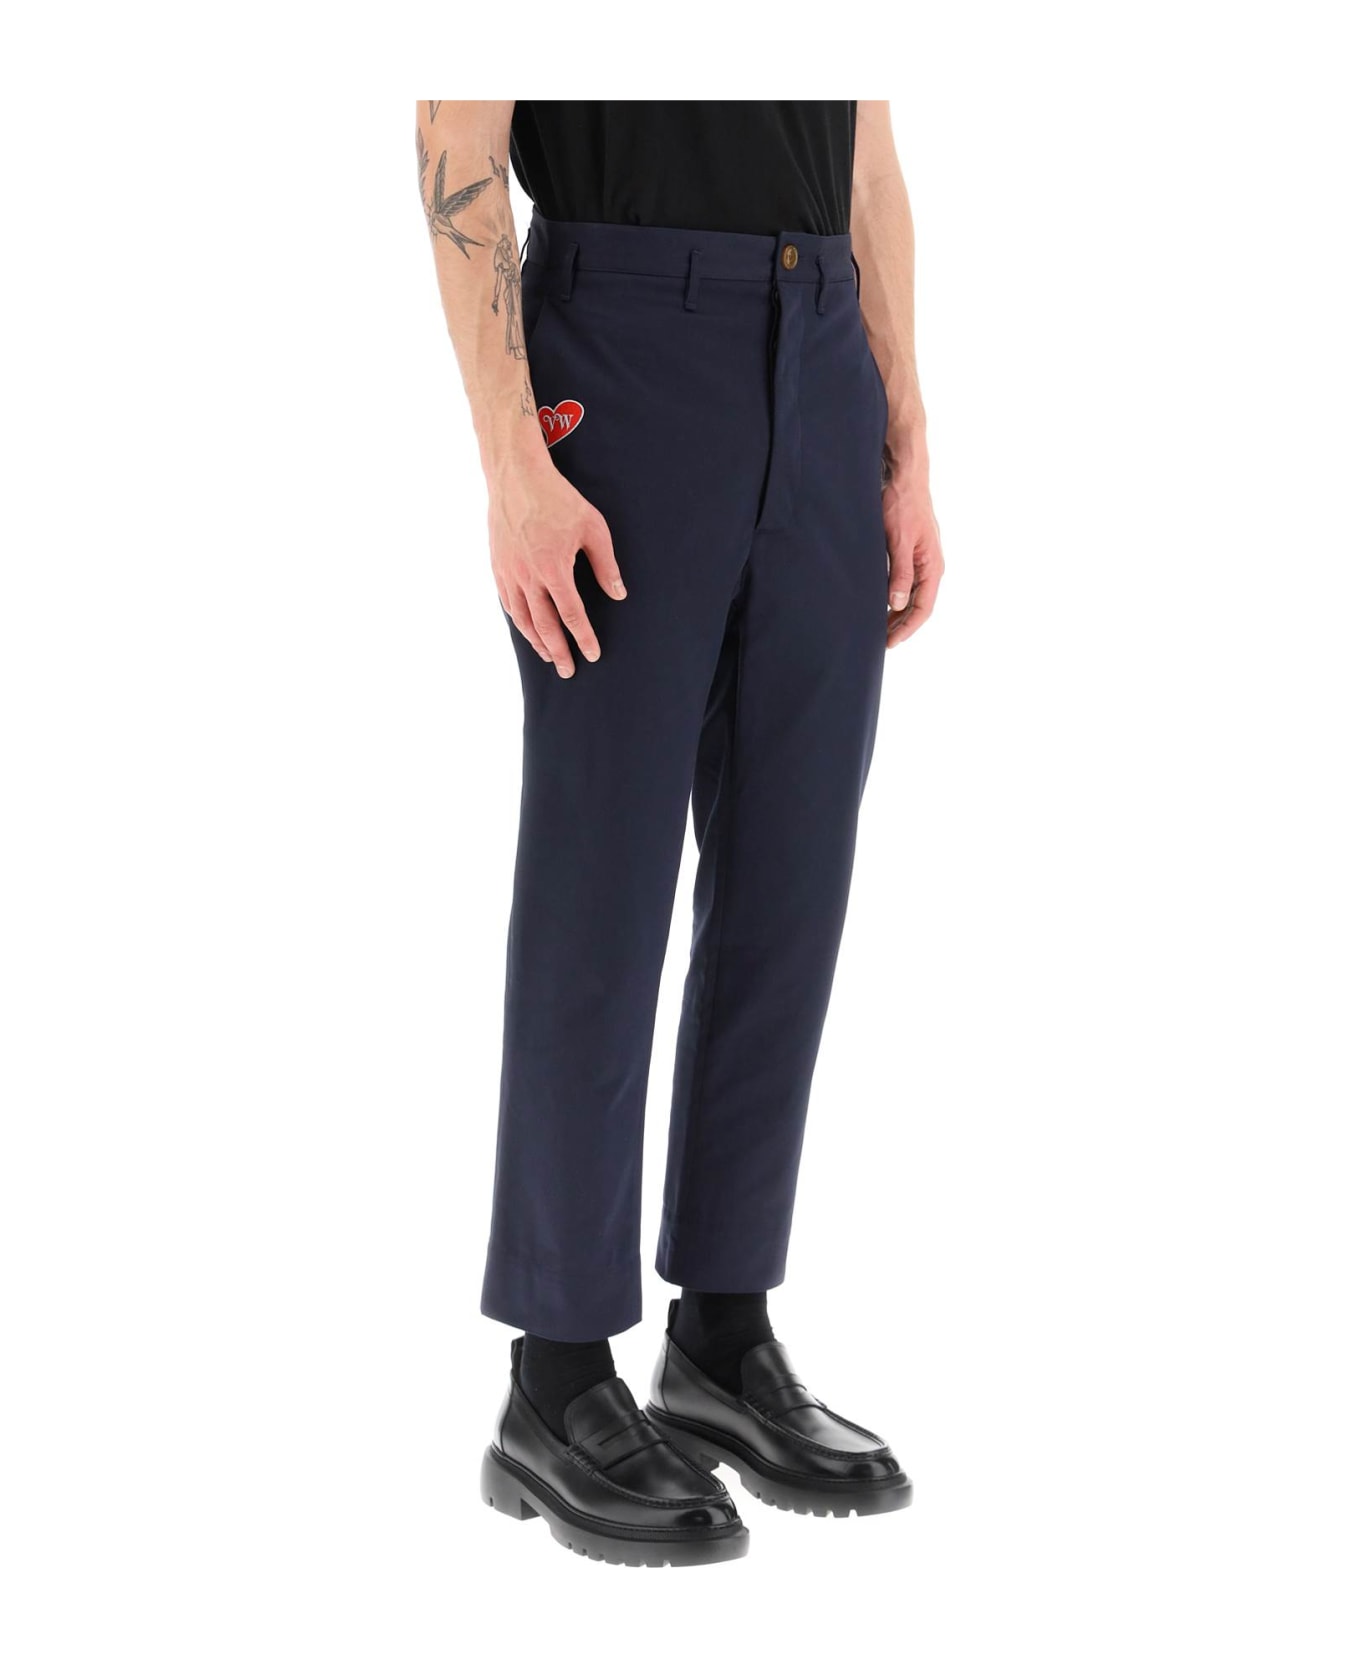 Vivienne Westwood Cropped Cruise Pants Featuring Embroidered Heart-shaped Logo - NAVY (Blue)